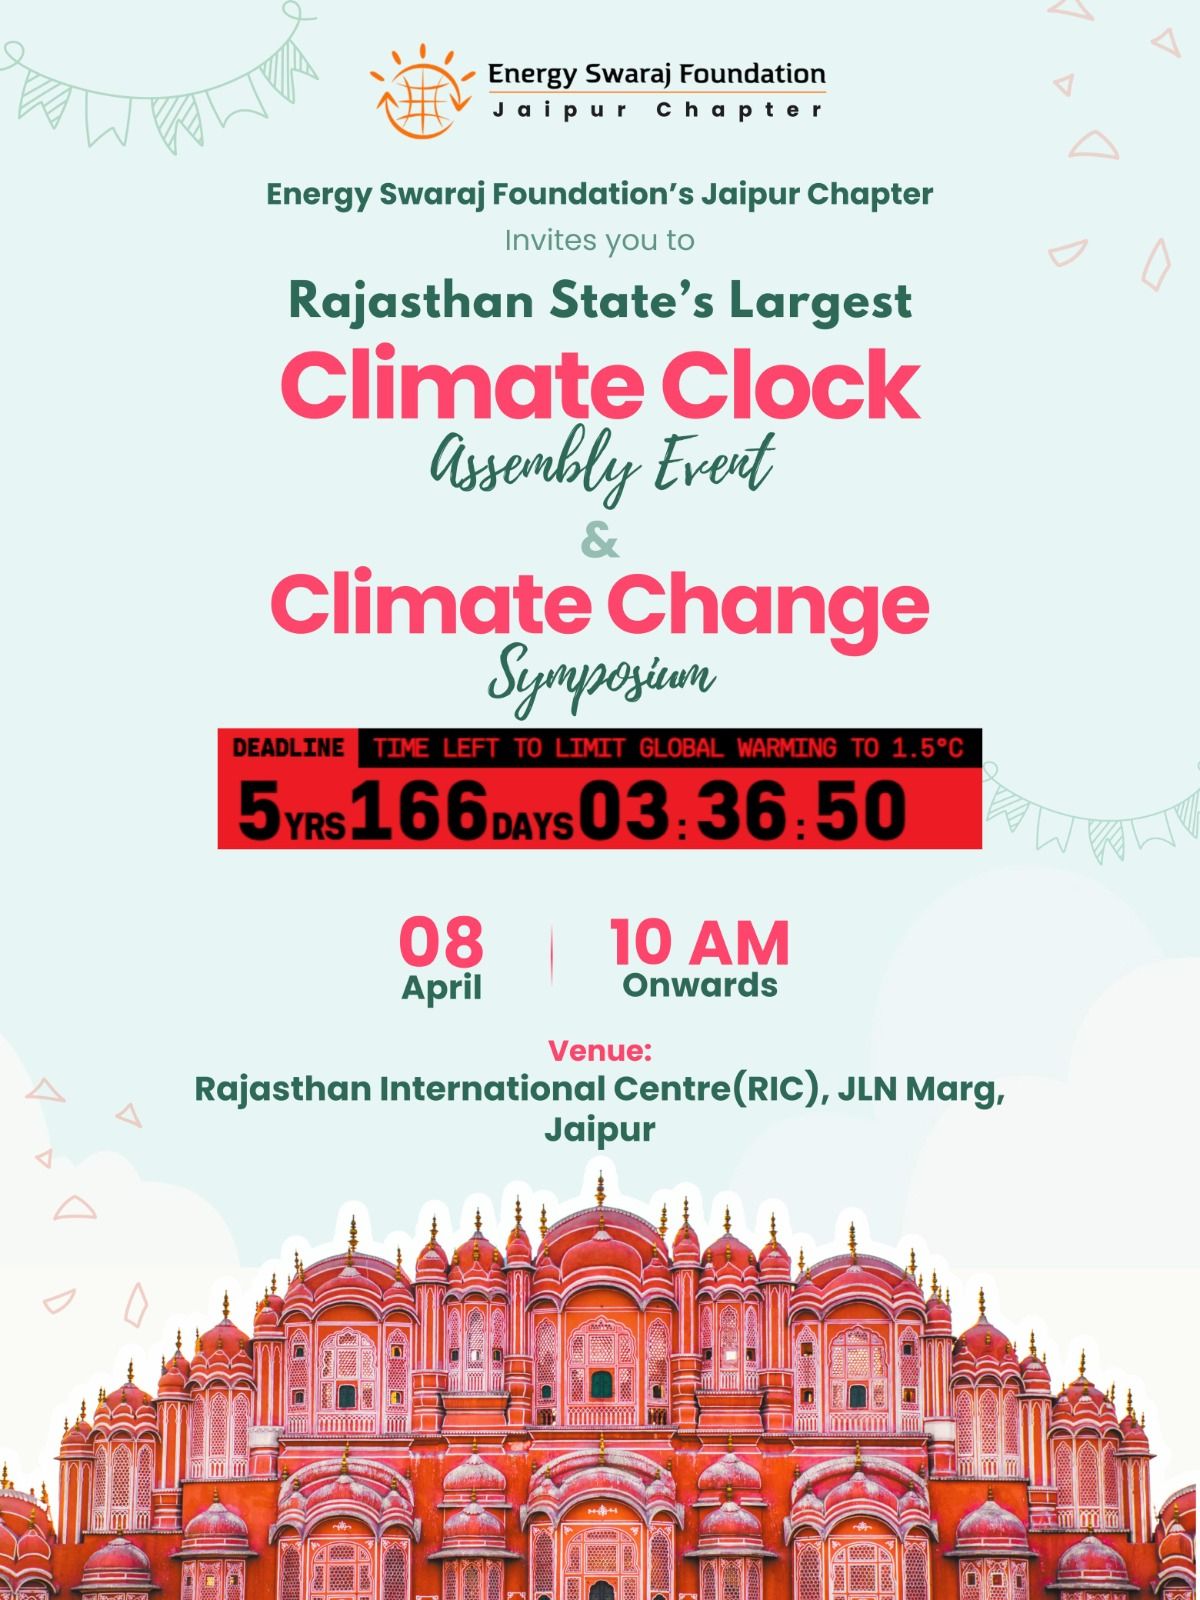 Rajasthan's Largest Climate Clock Assembly and Climate Change Symposium